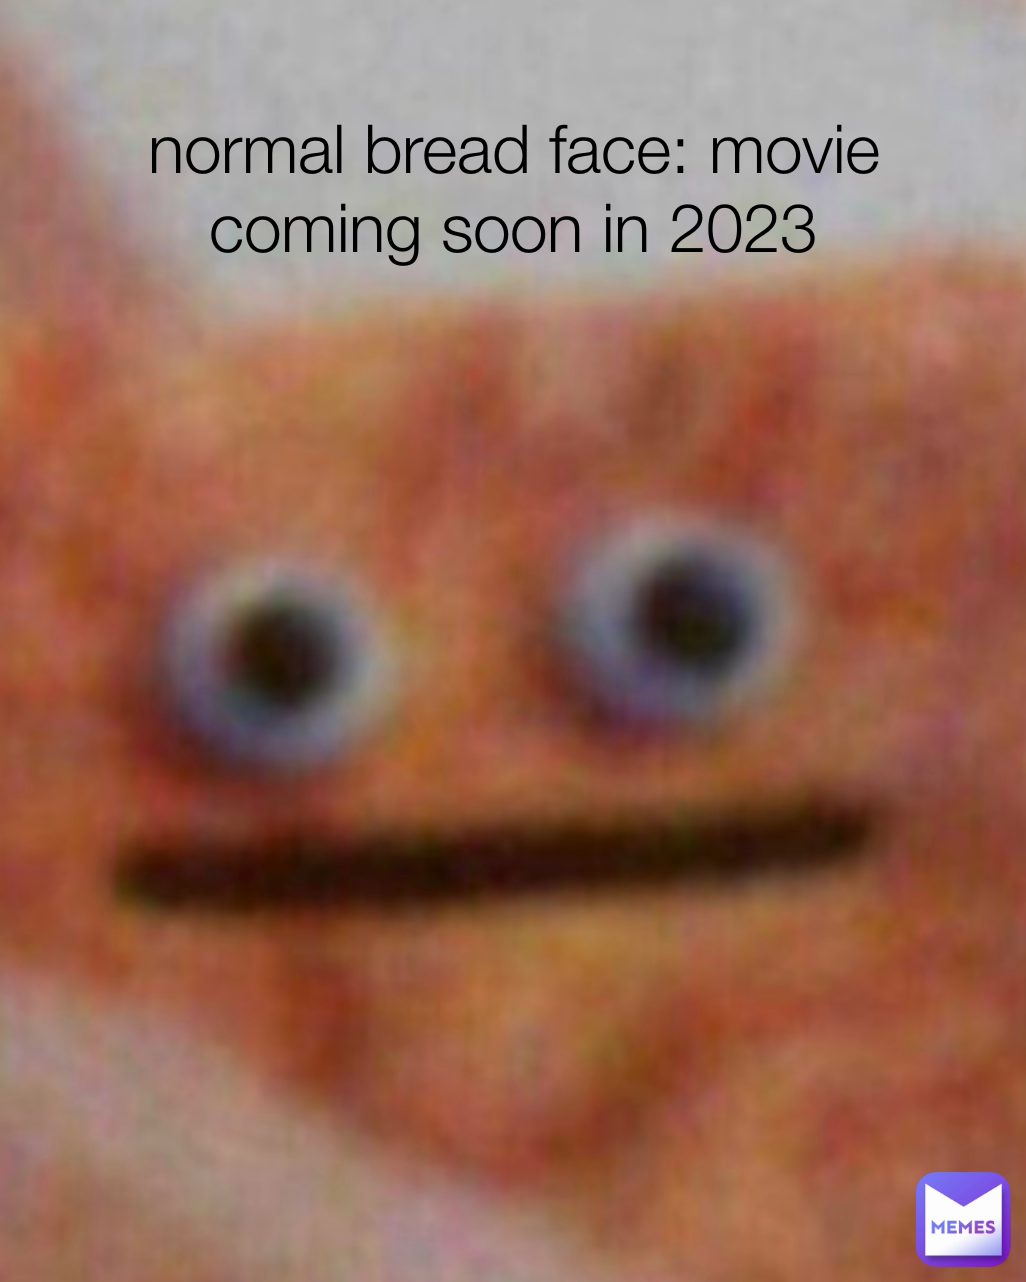 normal bread face: movie coming soon in 2023